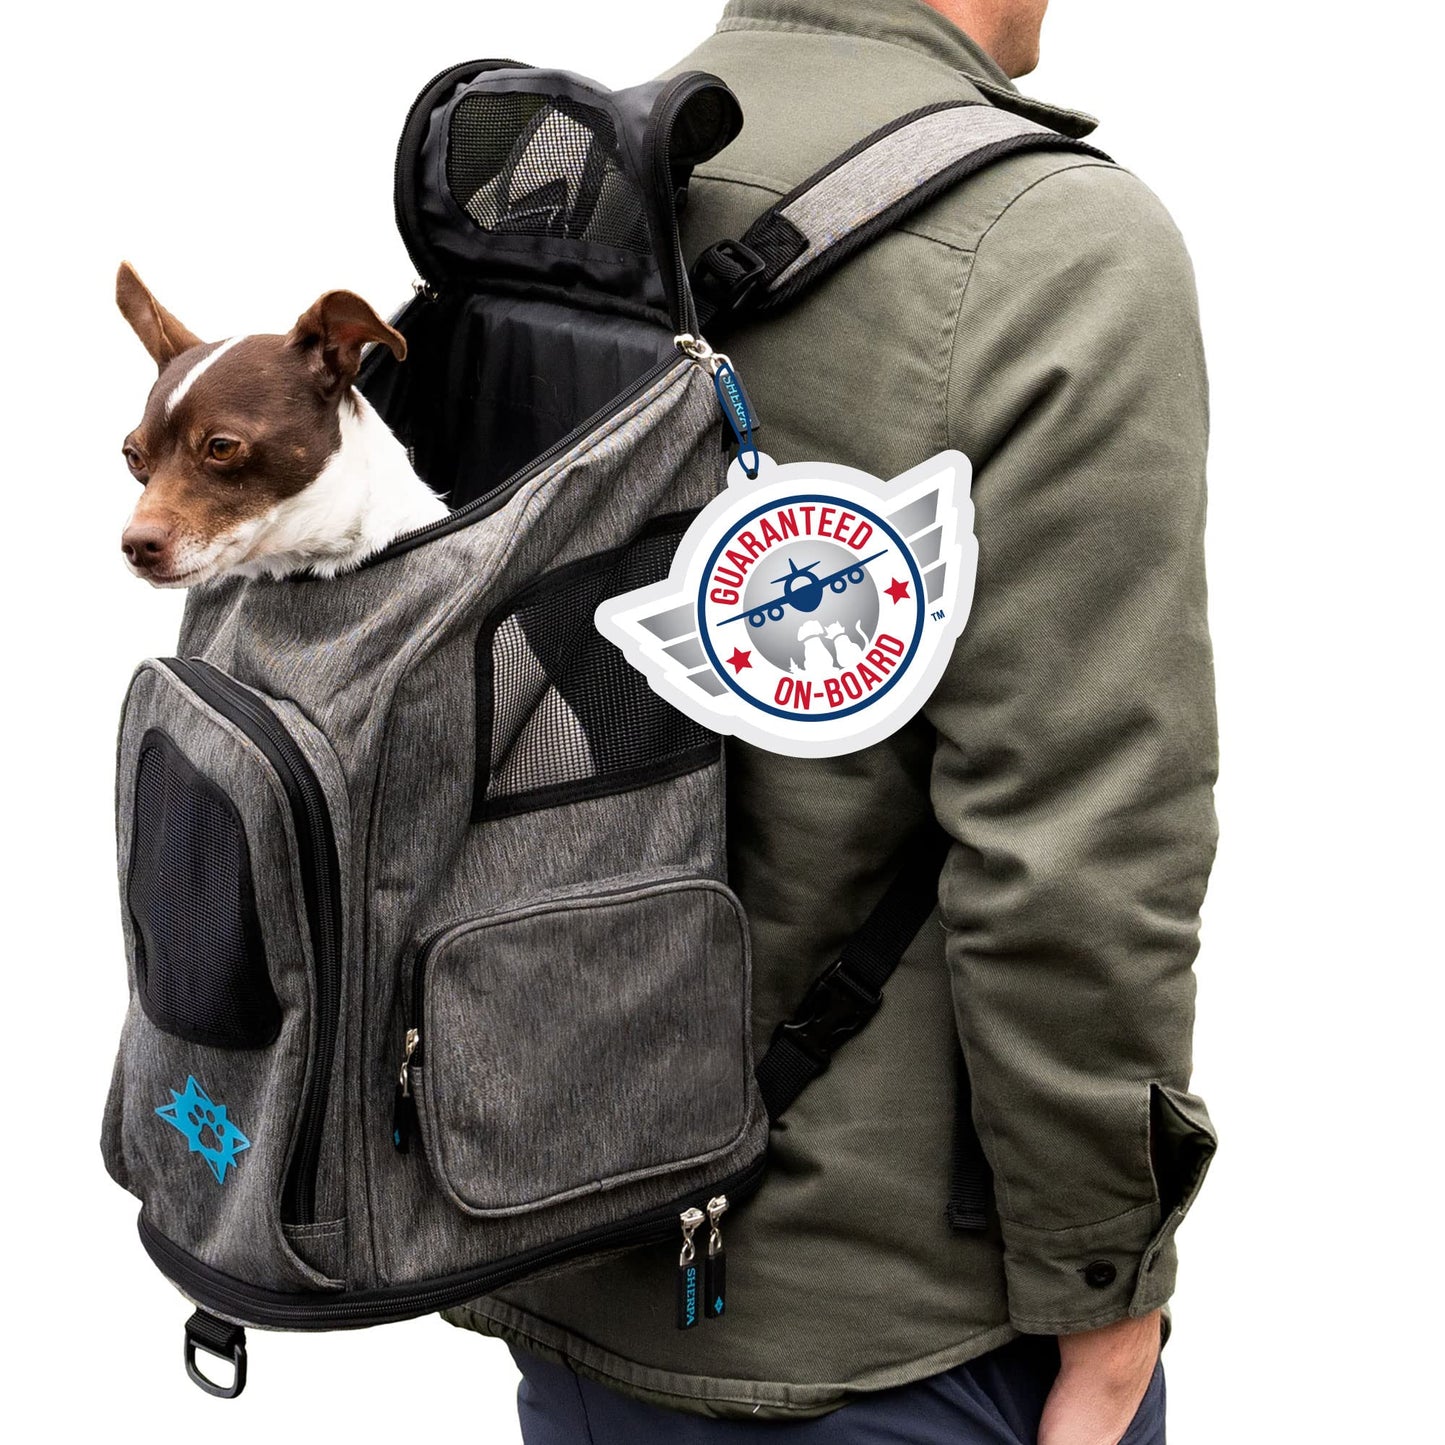 Sherpa Travel Backpacks & Pet Carriers for Cats & Small Dogs - Bubble Backpack, Hands-Free Sling, Tote Bag, & More - Multiple Styles & Sizes